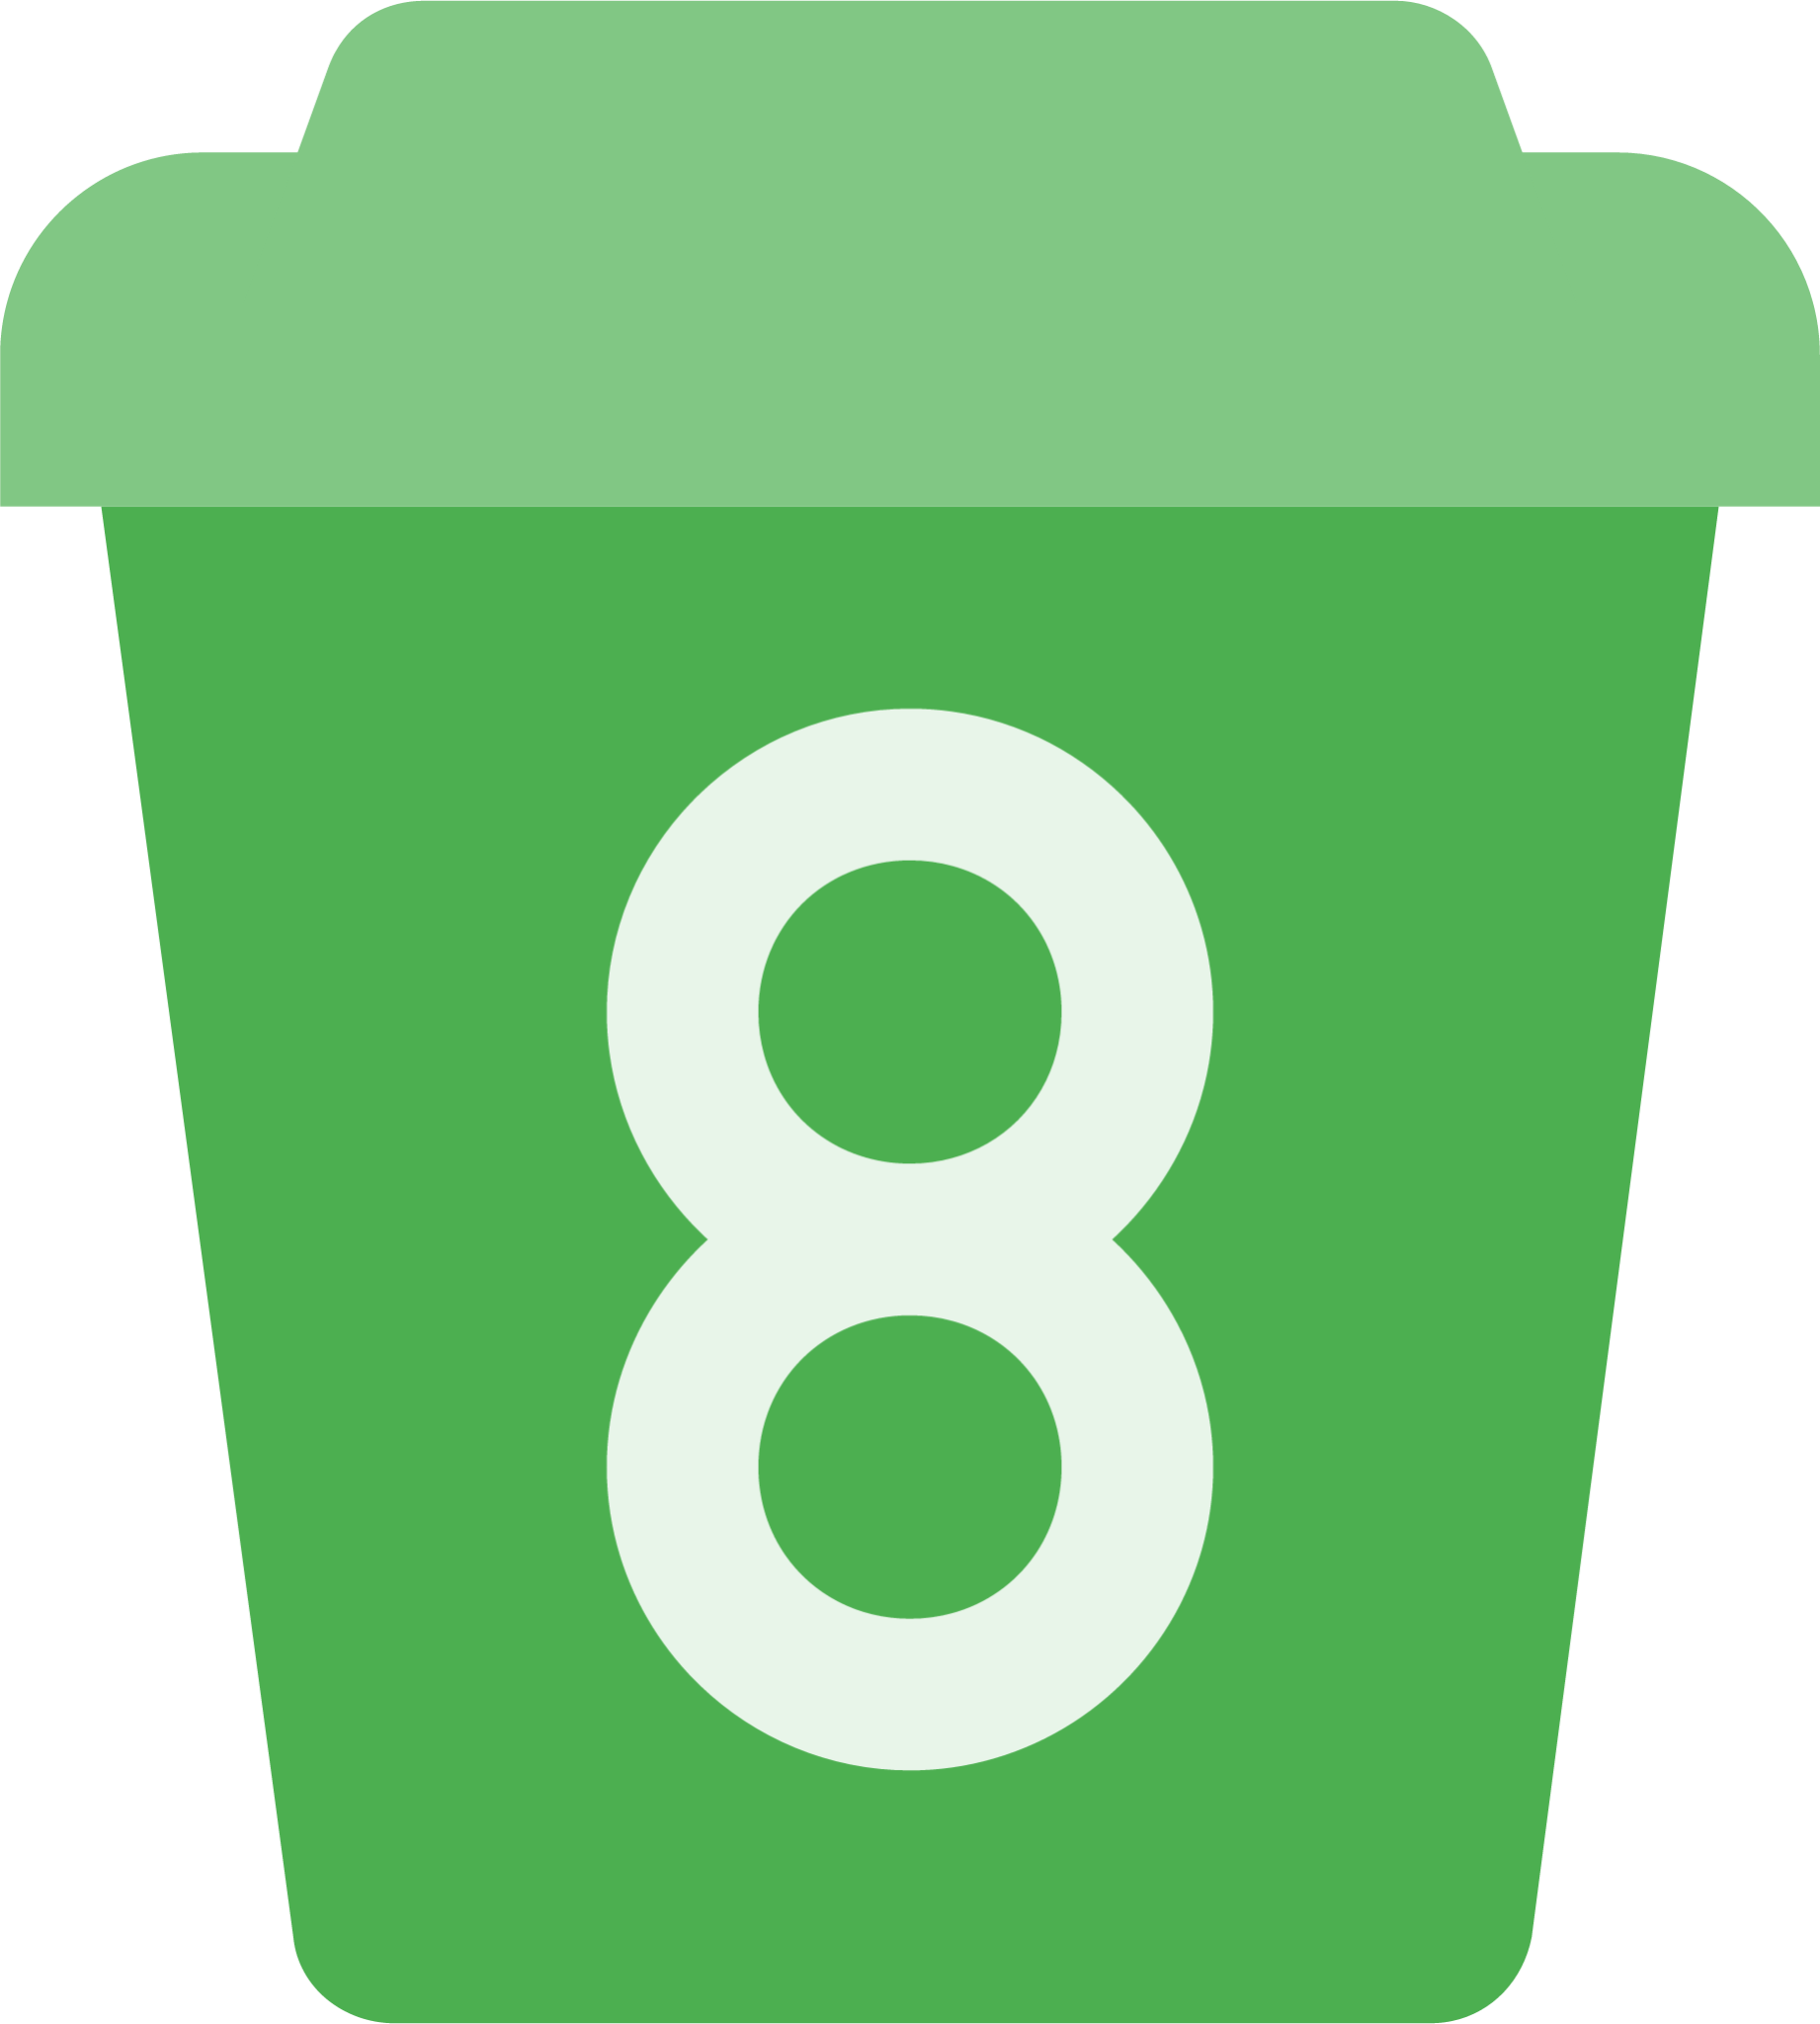 icons8 cup icon